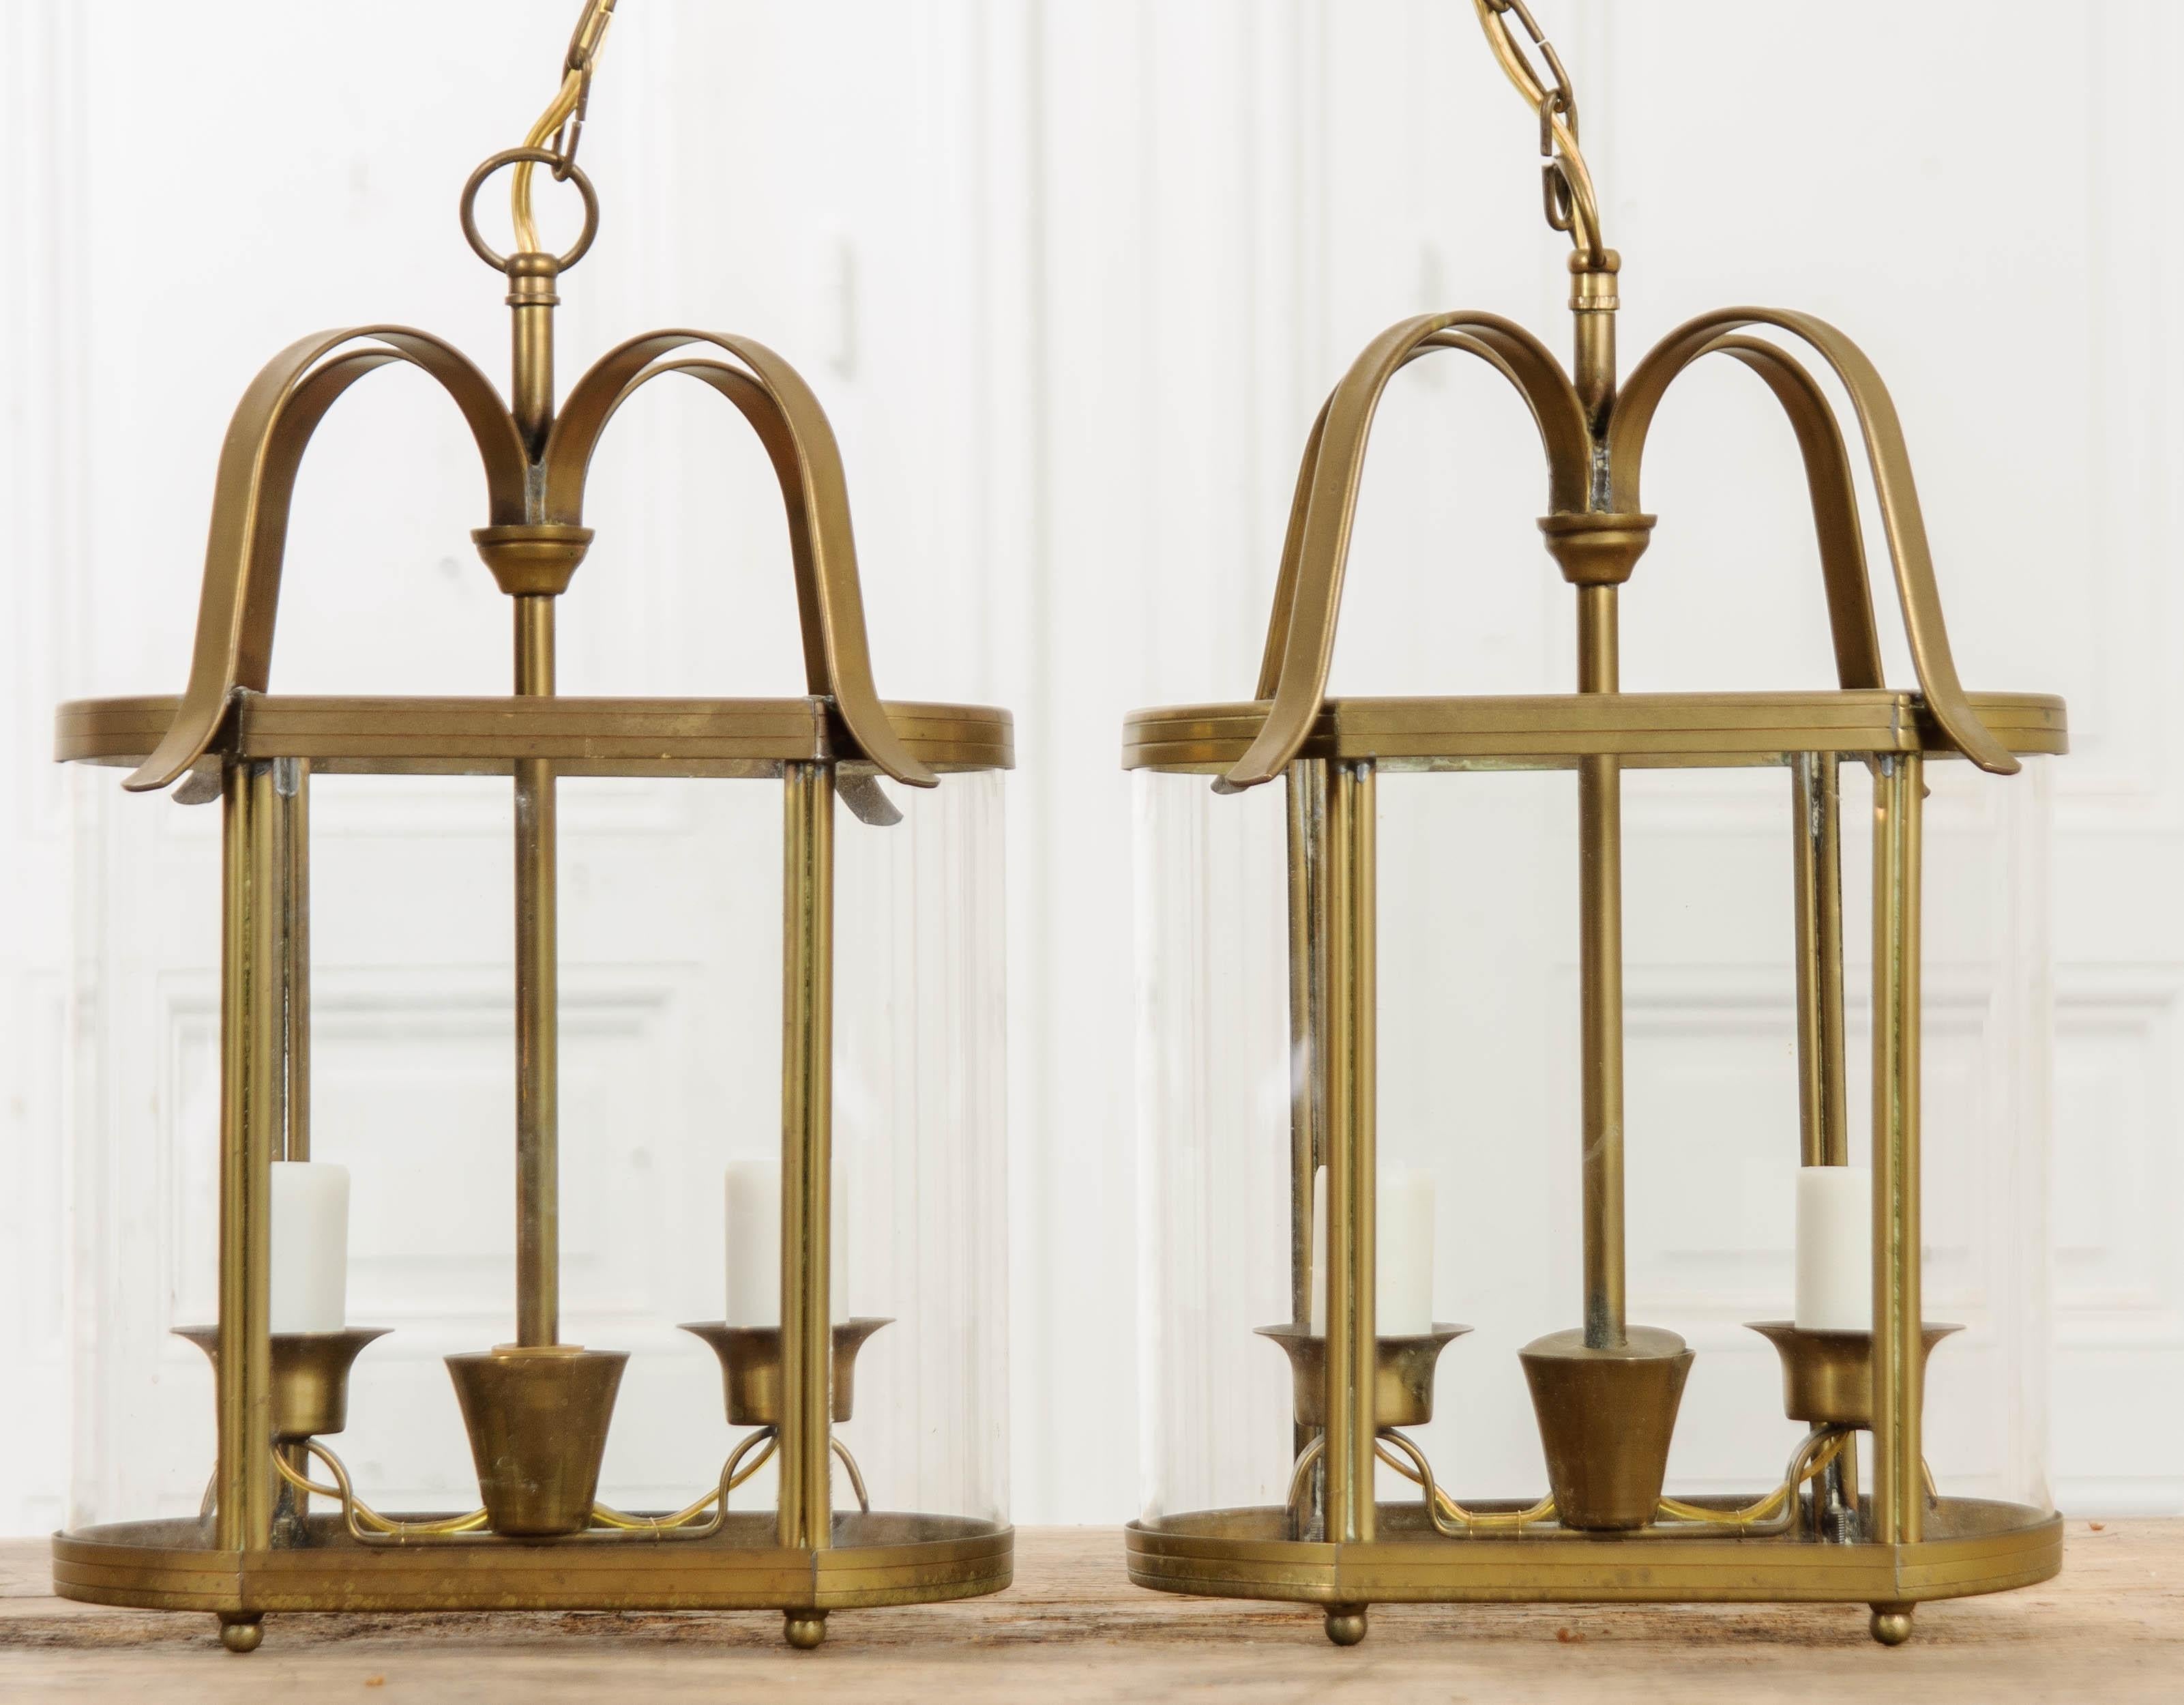 This darling pair of brass lanterns comes from early 20th century France. The fixtures have a simple, yet elegant design, making their appeal universal. They would make exceptional additions to a foyer or entry, bathroom, breakfast/reading nook,